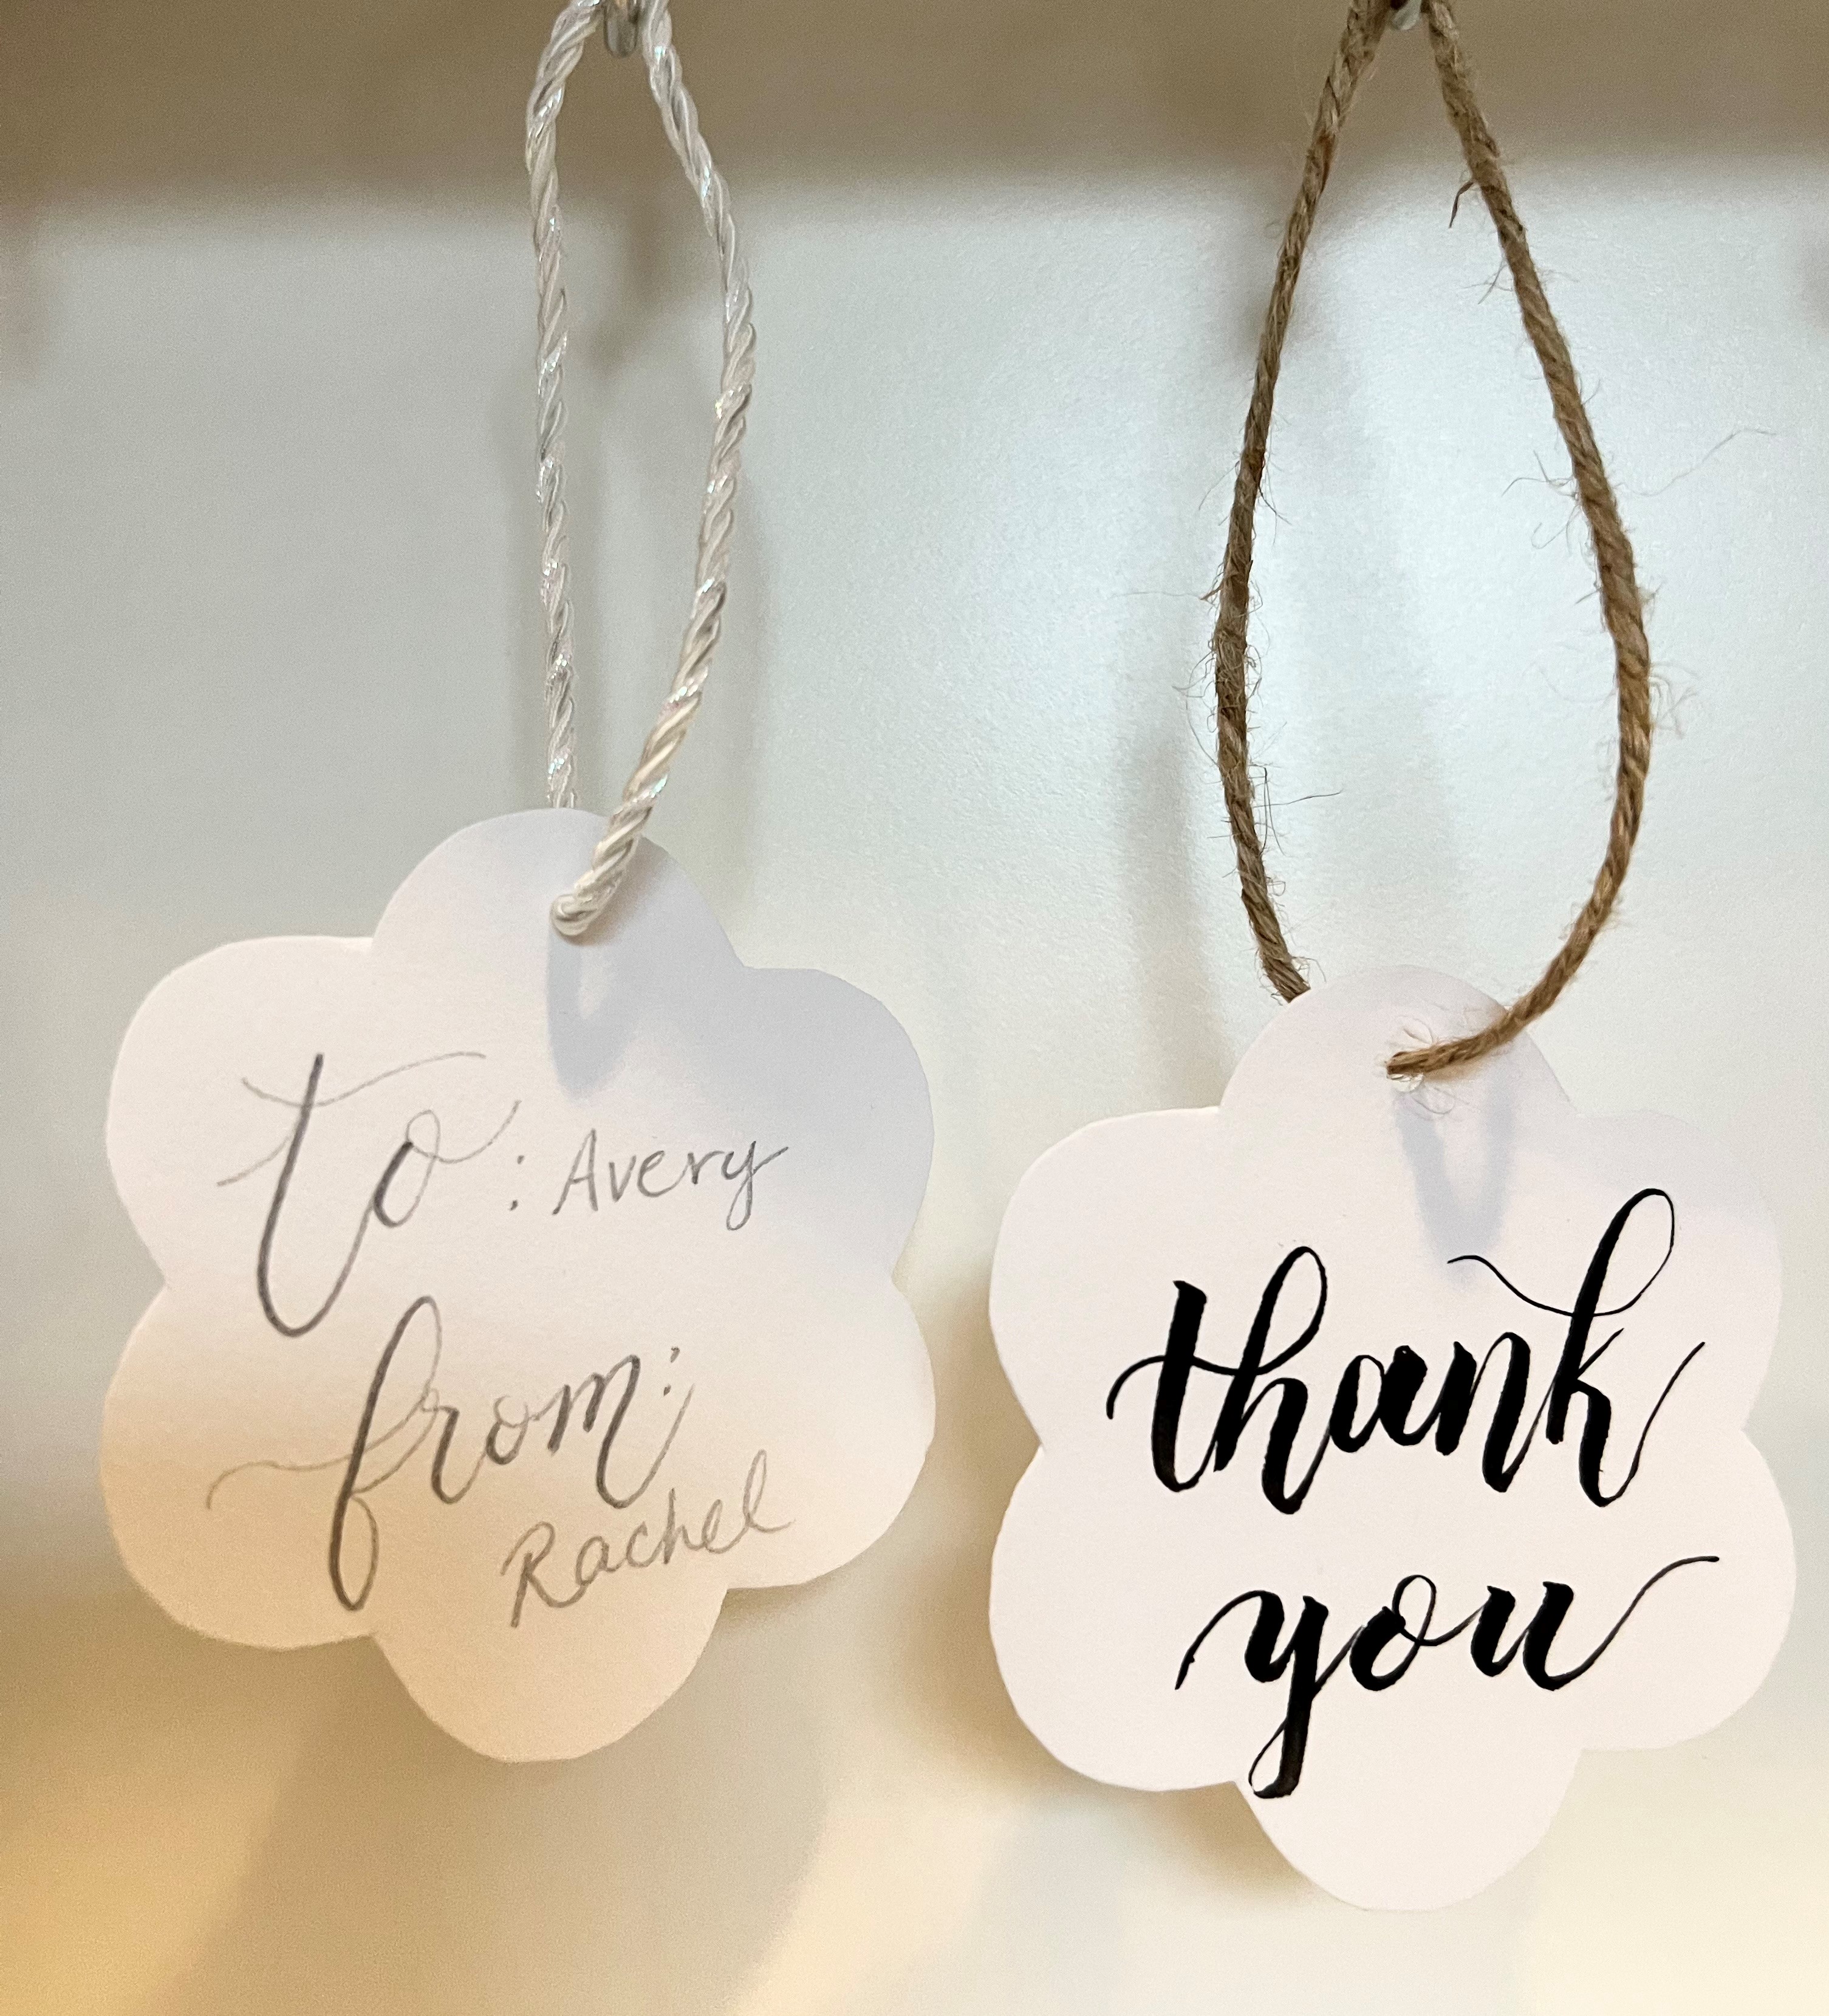 Two white flower-shaped gift tags with calligraphy black text